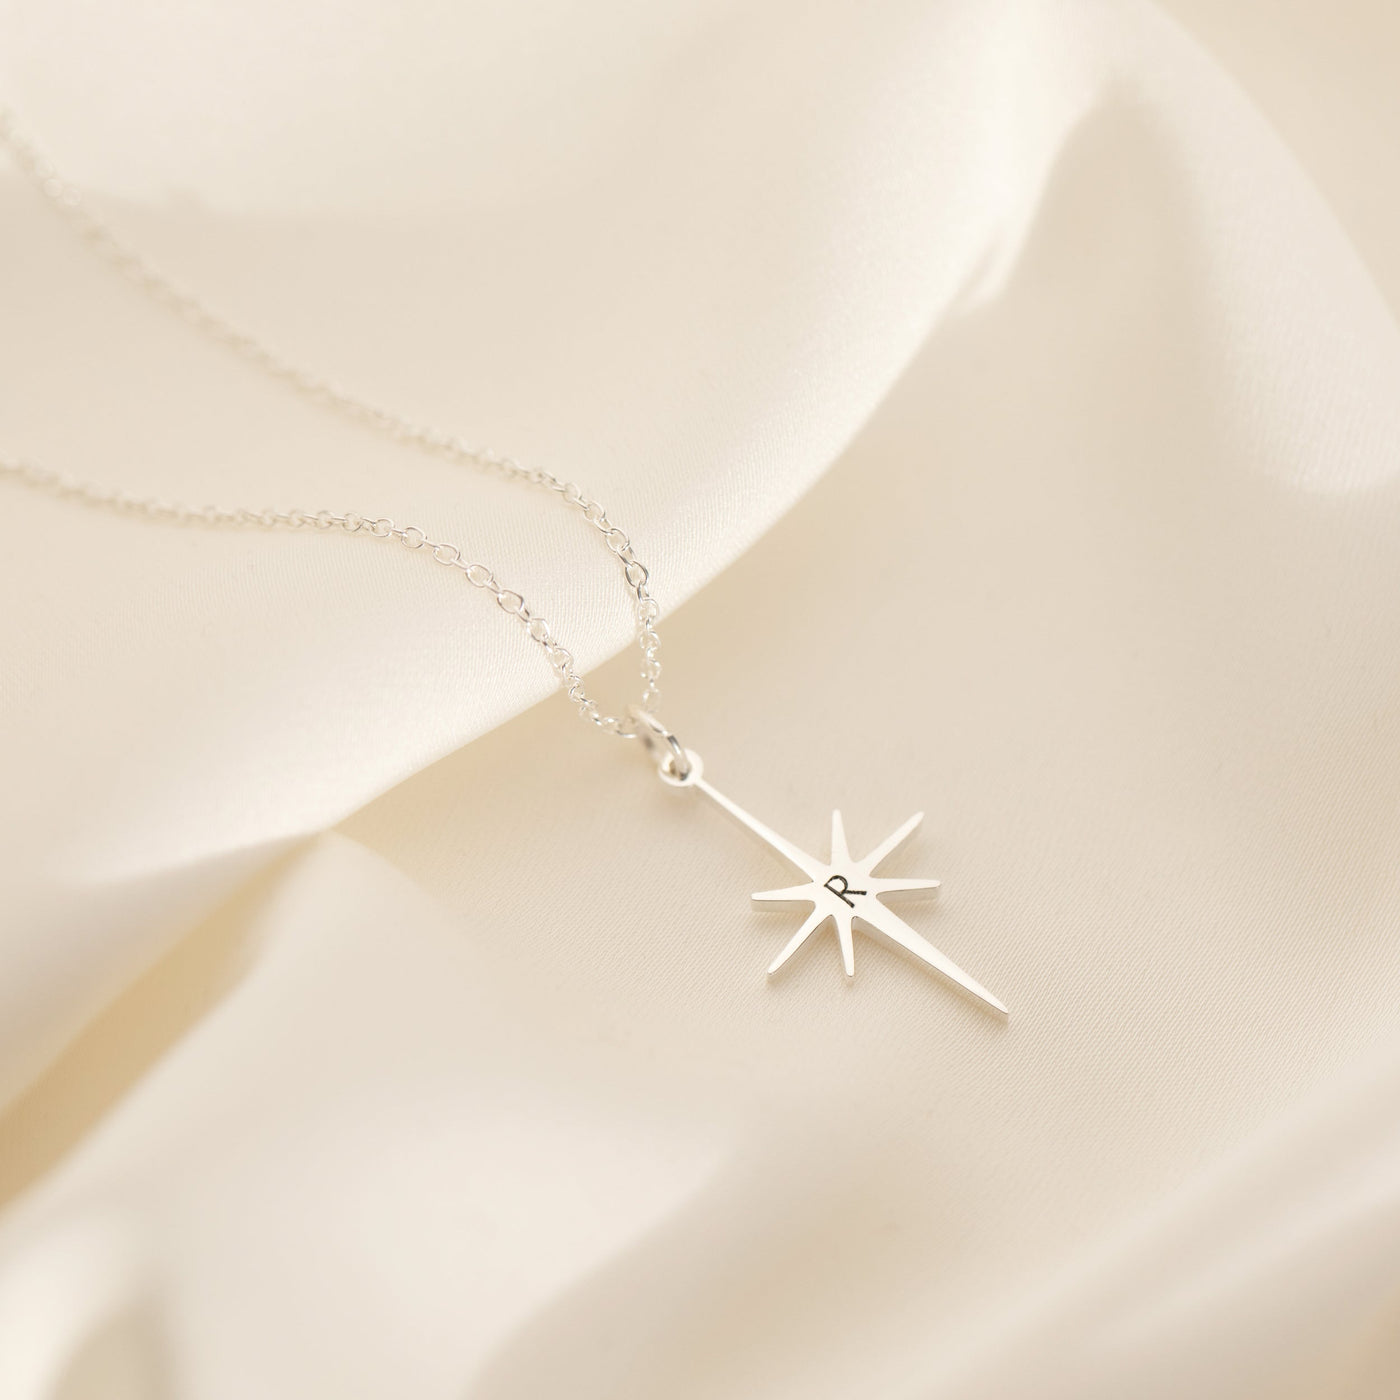 North Star Necklace in Silver